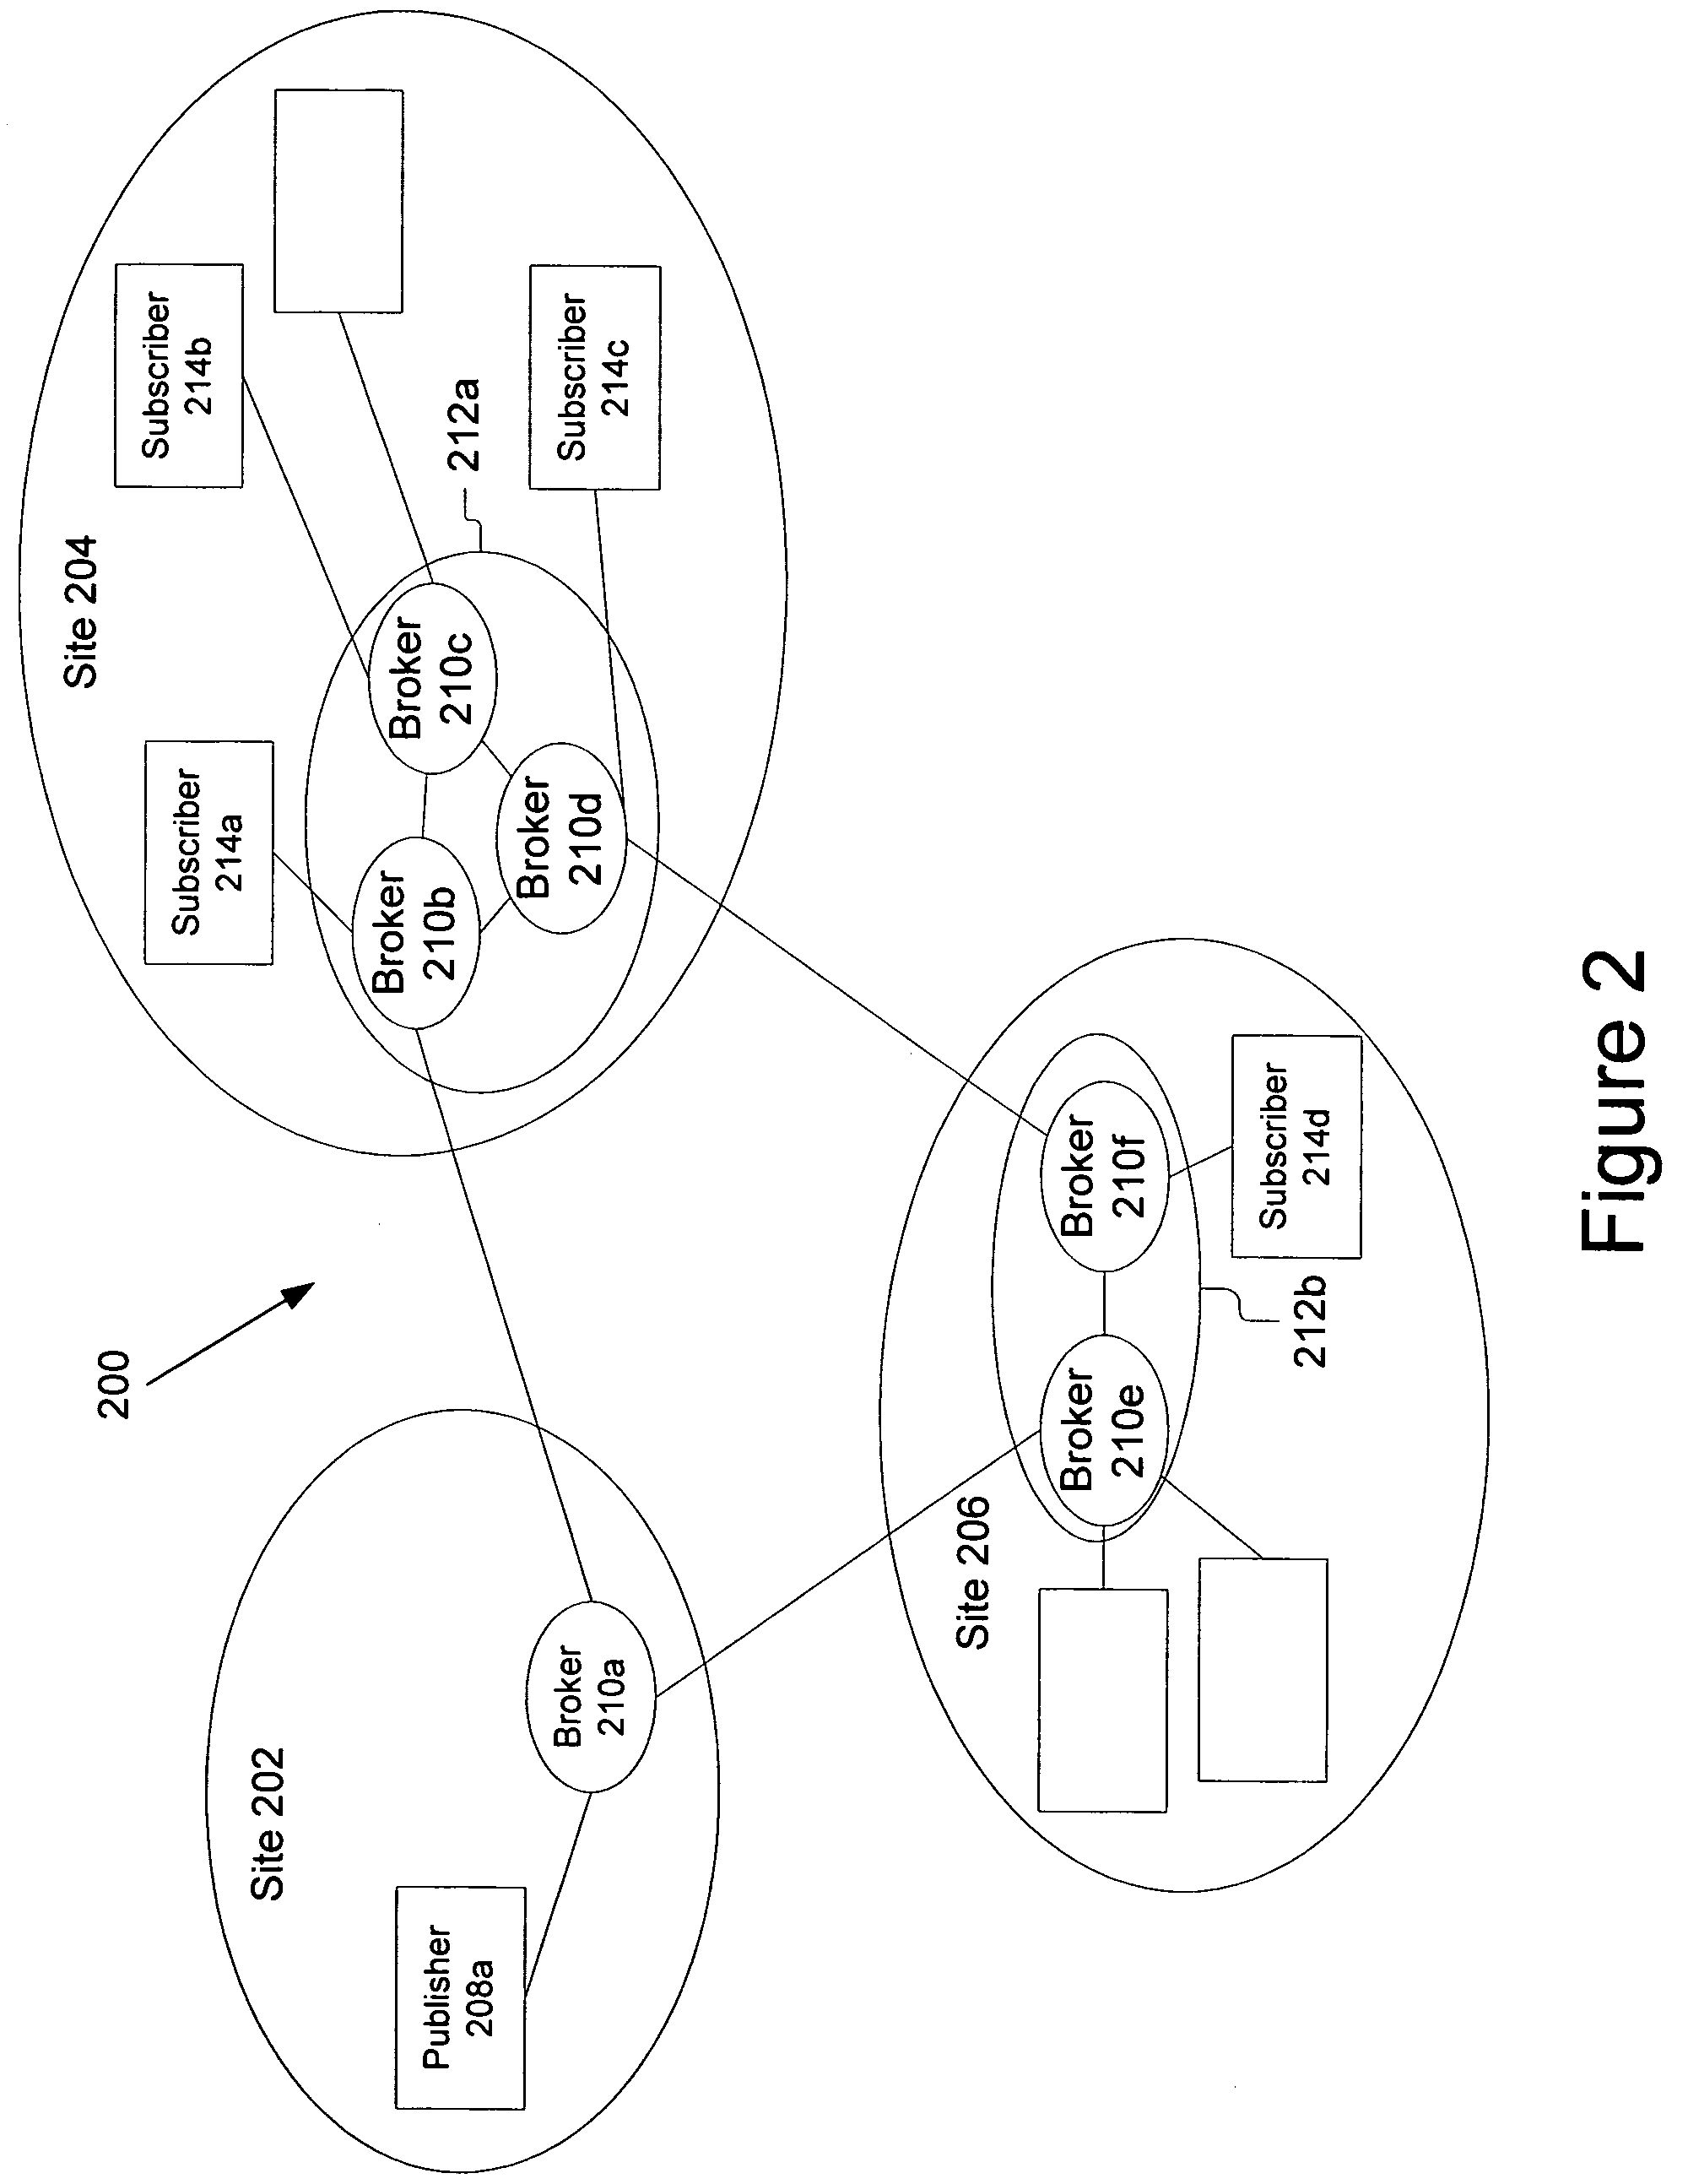 Dynamic subscription and message routing on a topic between publishing nodes and subscribing nodes